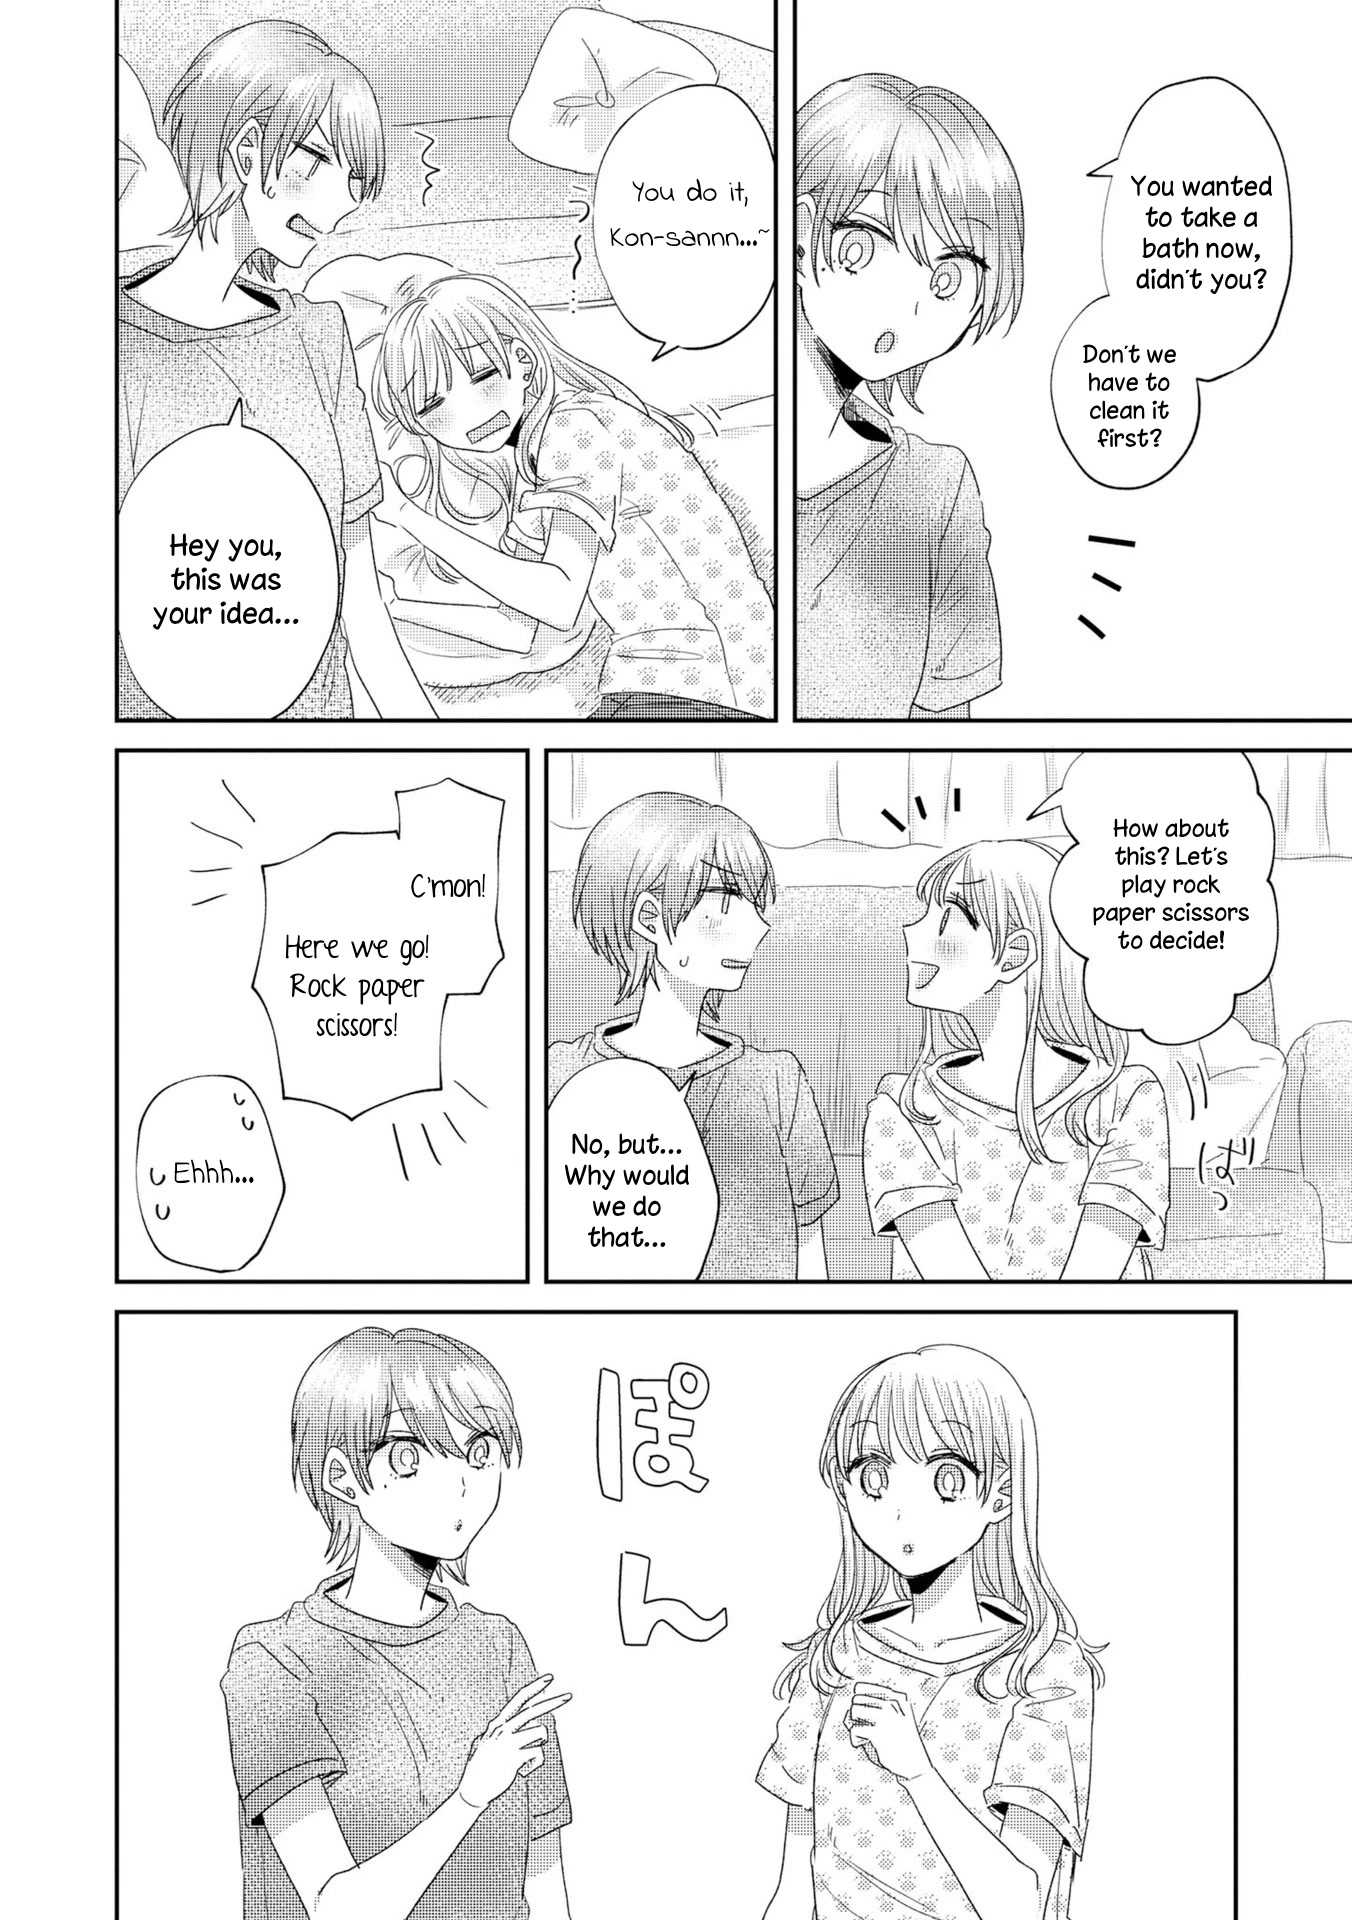 Today, We Continue Our Lives Together Under The Same Roof Chapter 31.5: Volume 2 Extras - Picture 3